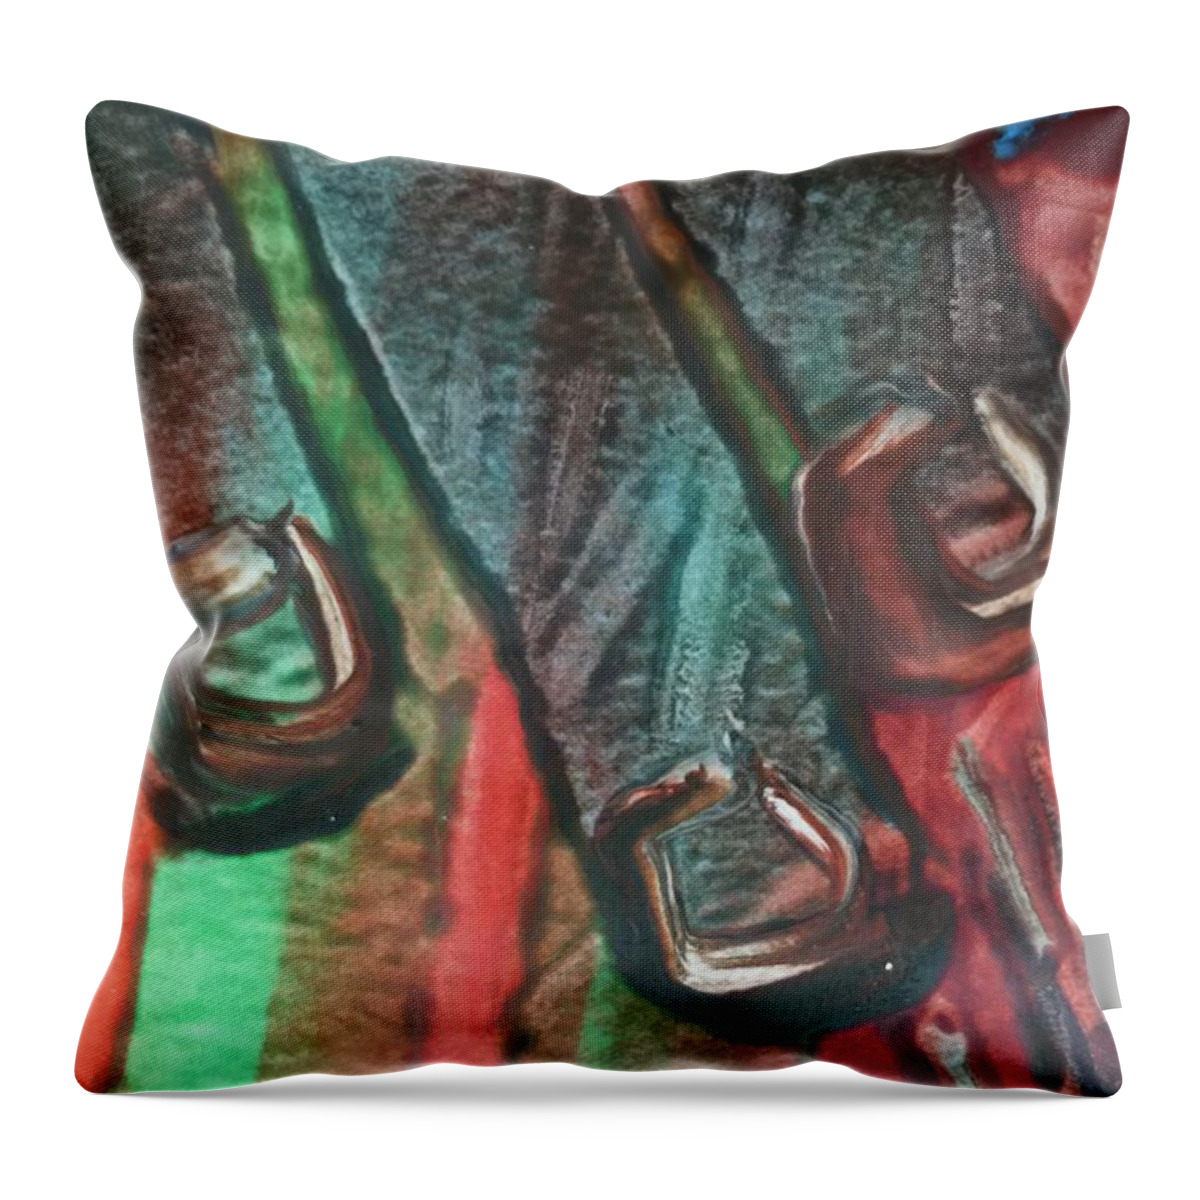 Abstract Throw Pillow featuring the painting Untitled by Kyle Braund